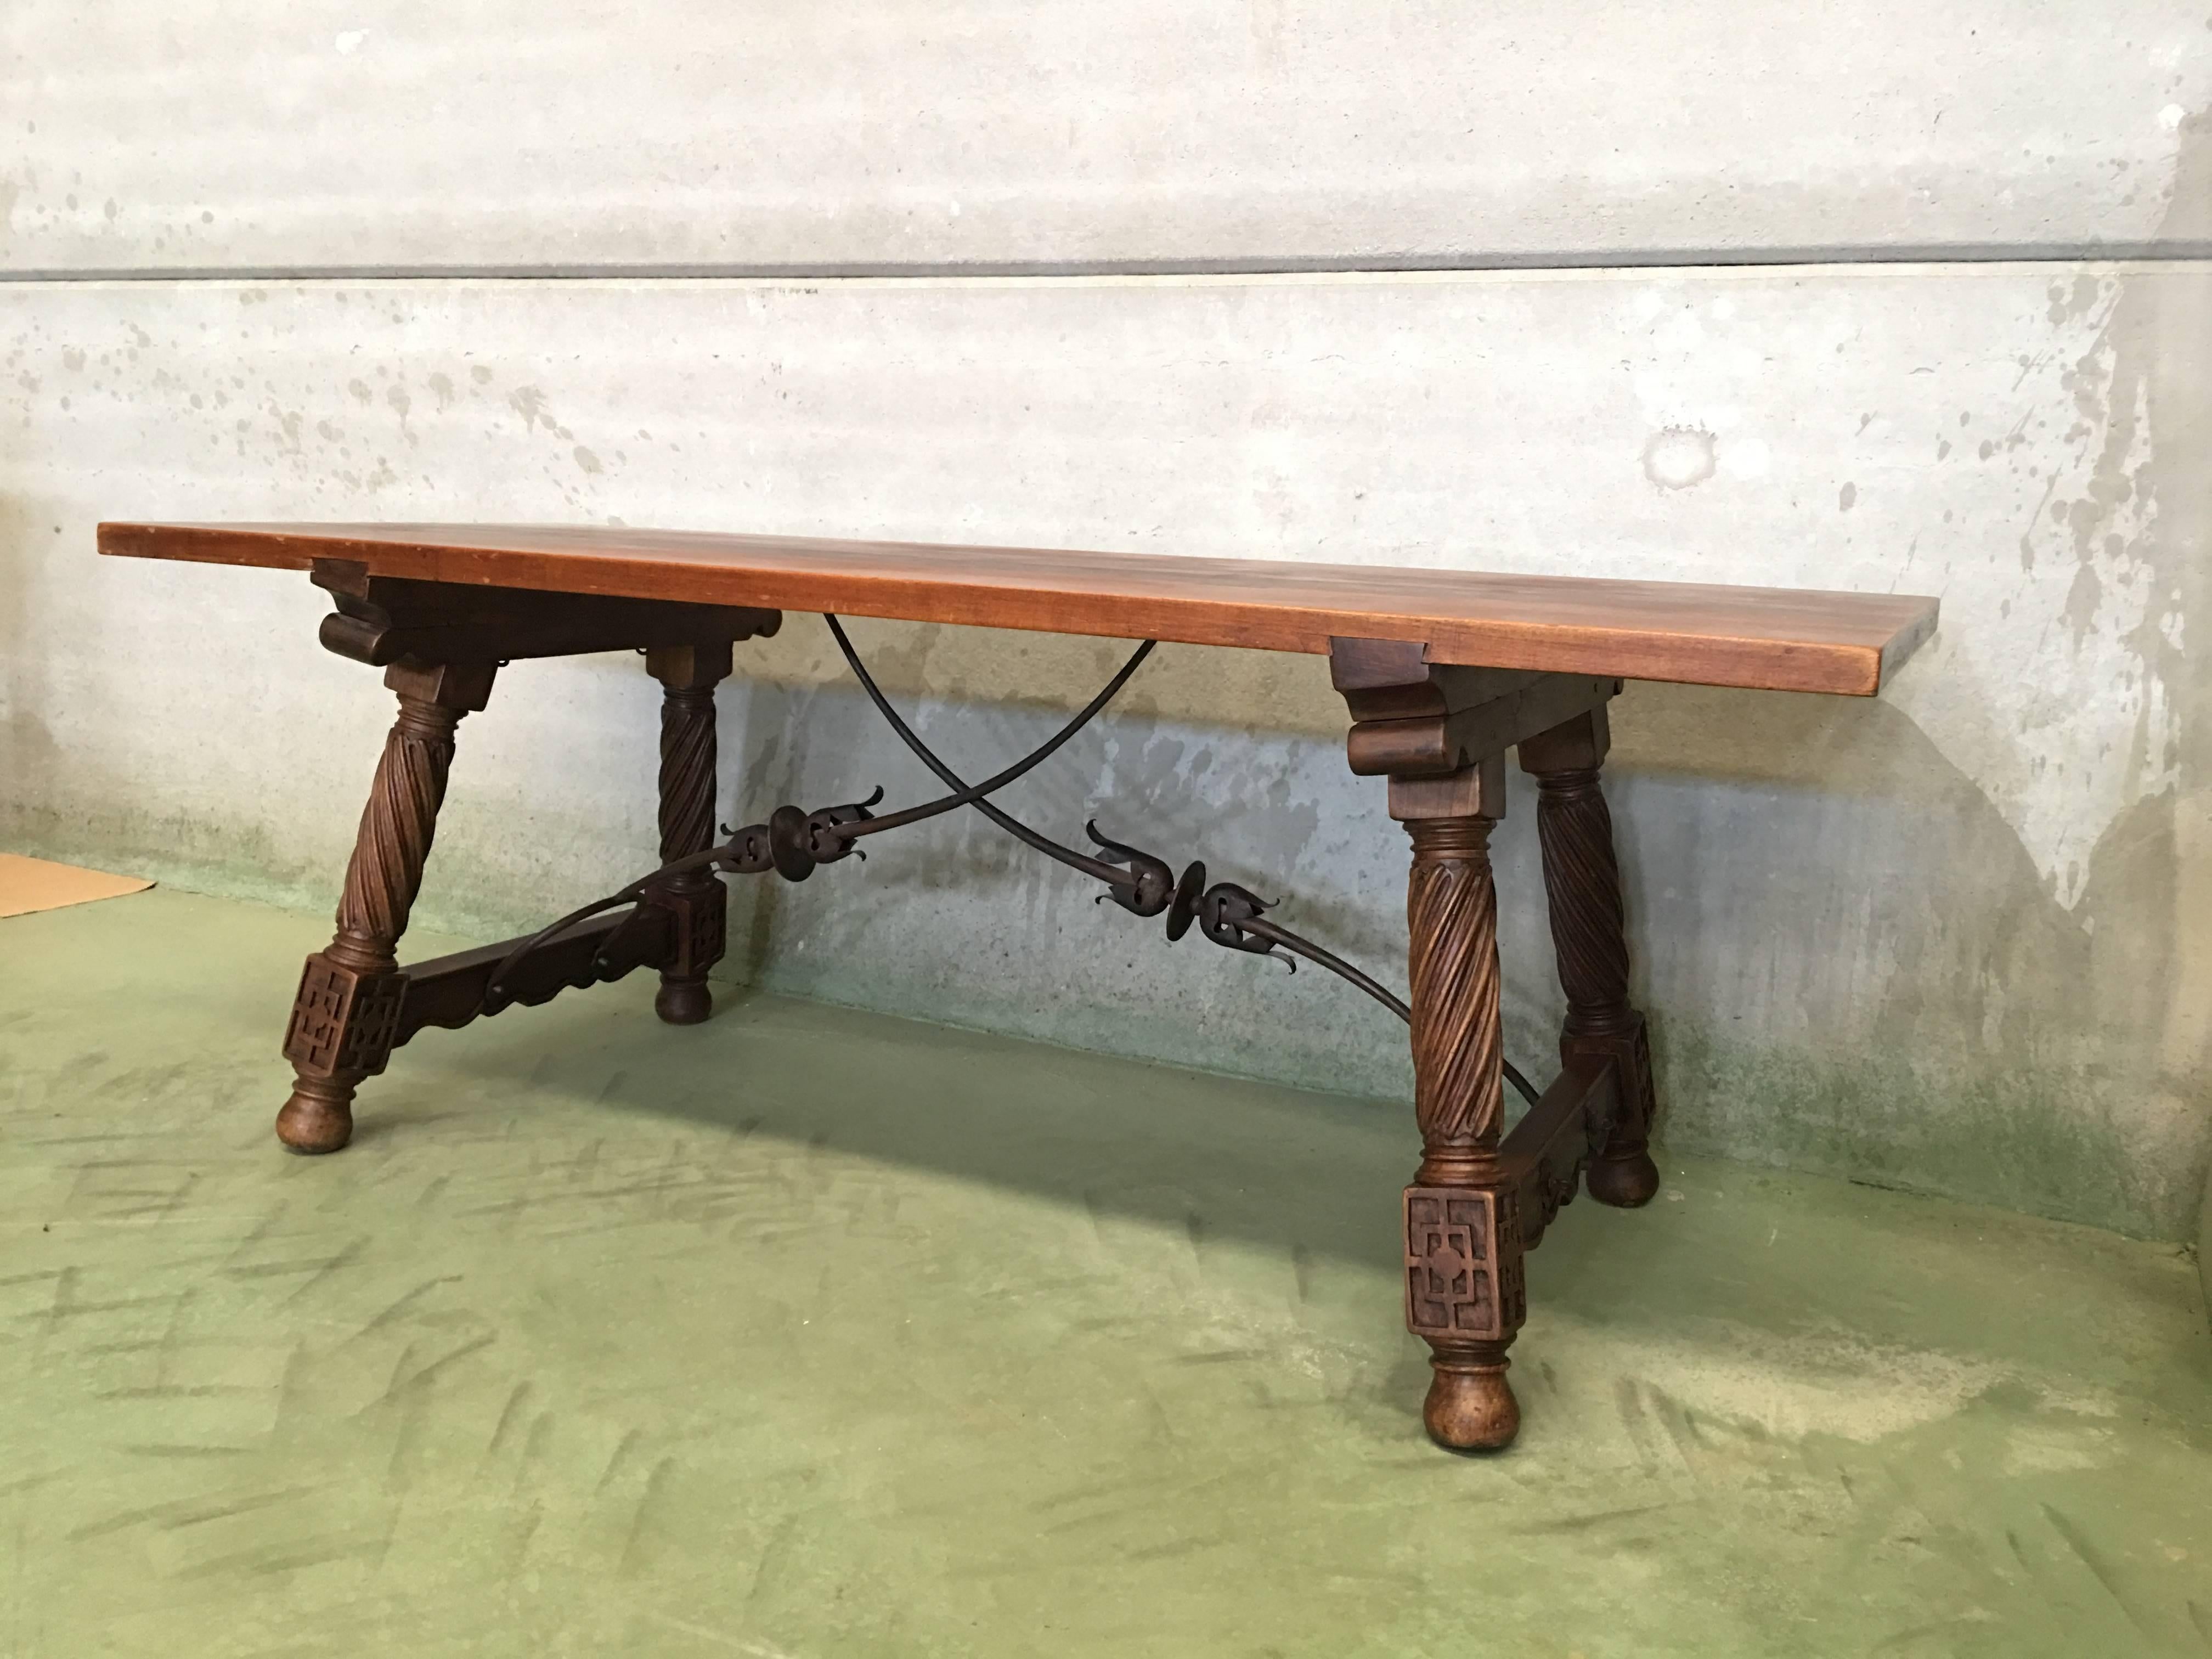 Renaissance 18th Spanish Refectory Desk Table with Solomonic Legs and Iron Stretcher